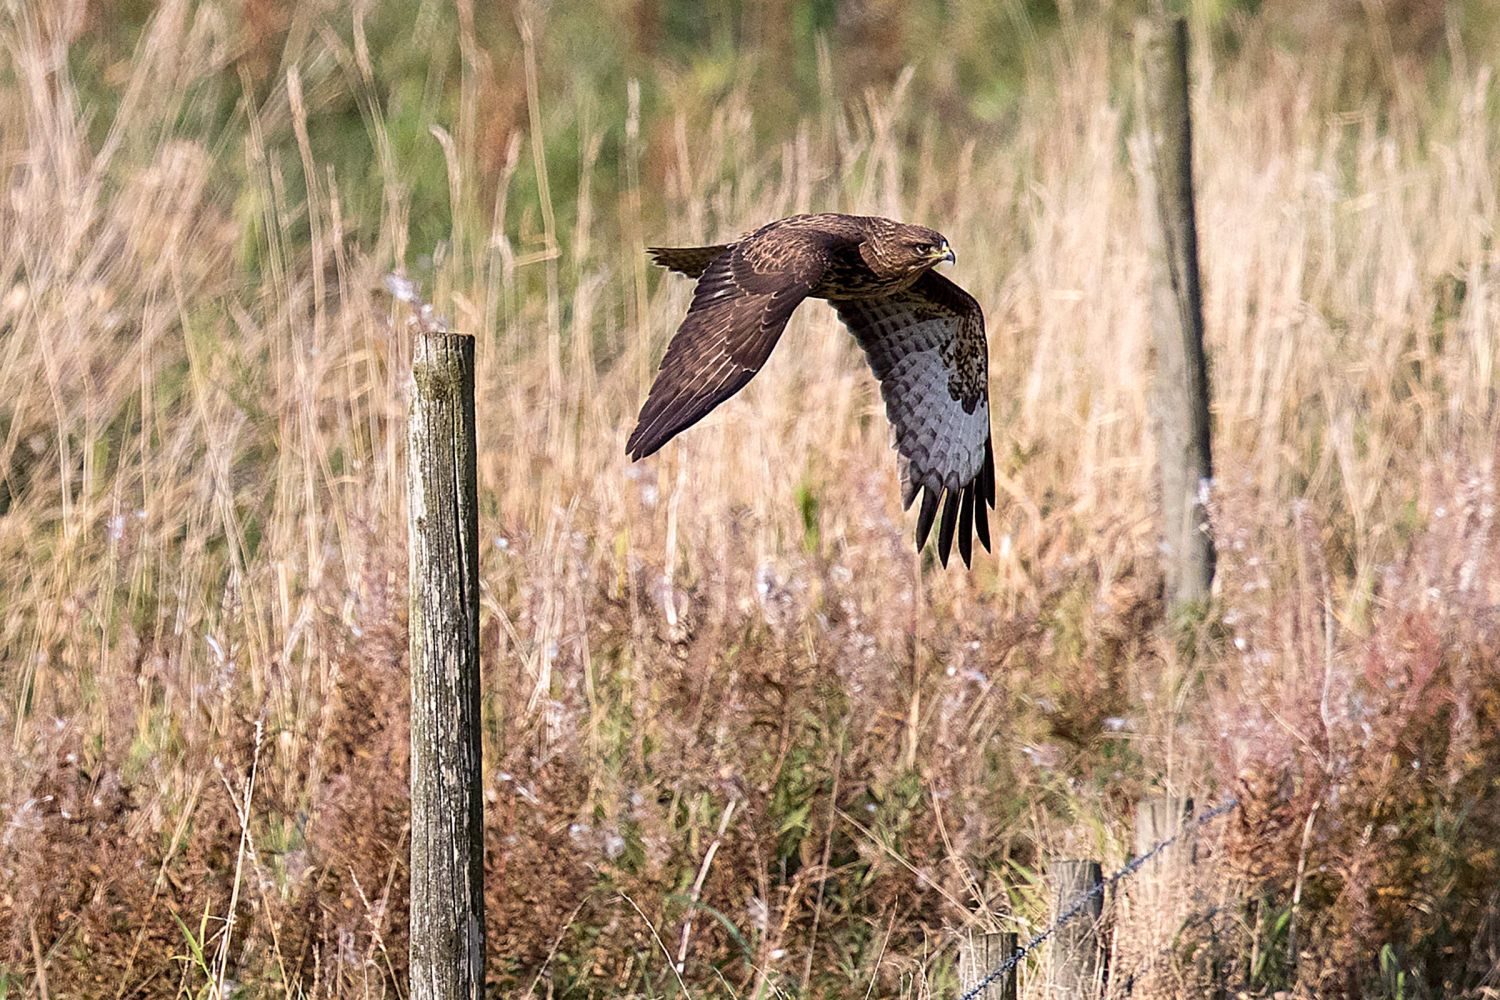 A Common Buzzard taking off from a fence post